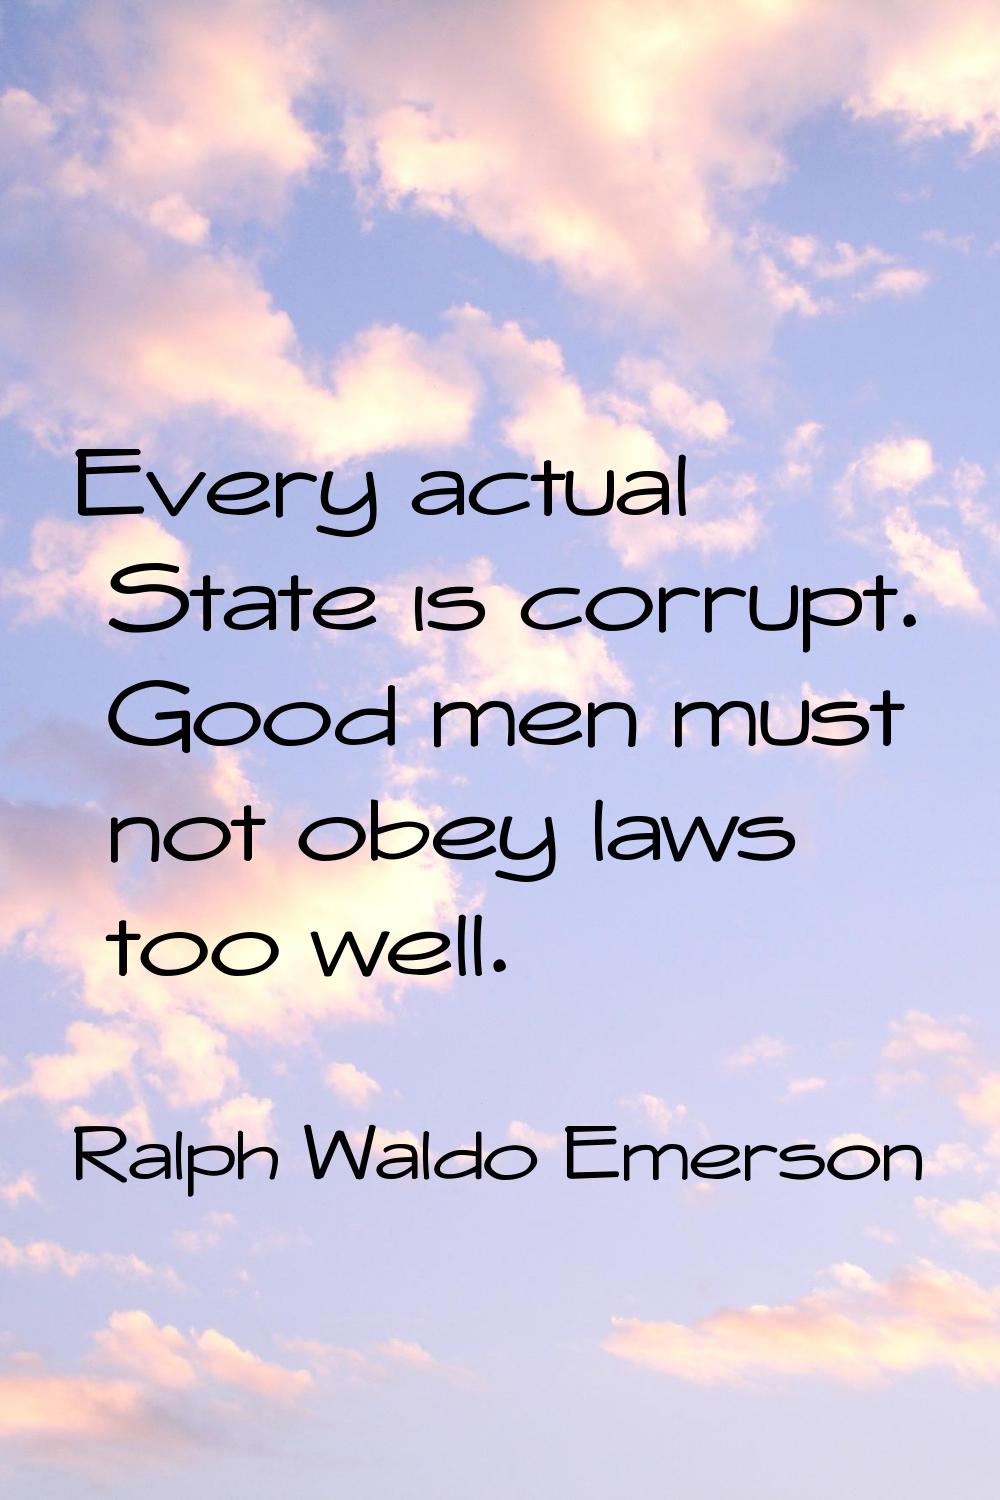 Every actual State is corrupt. Good men must not obey laws too well.